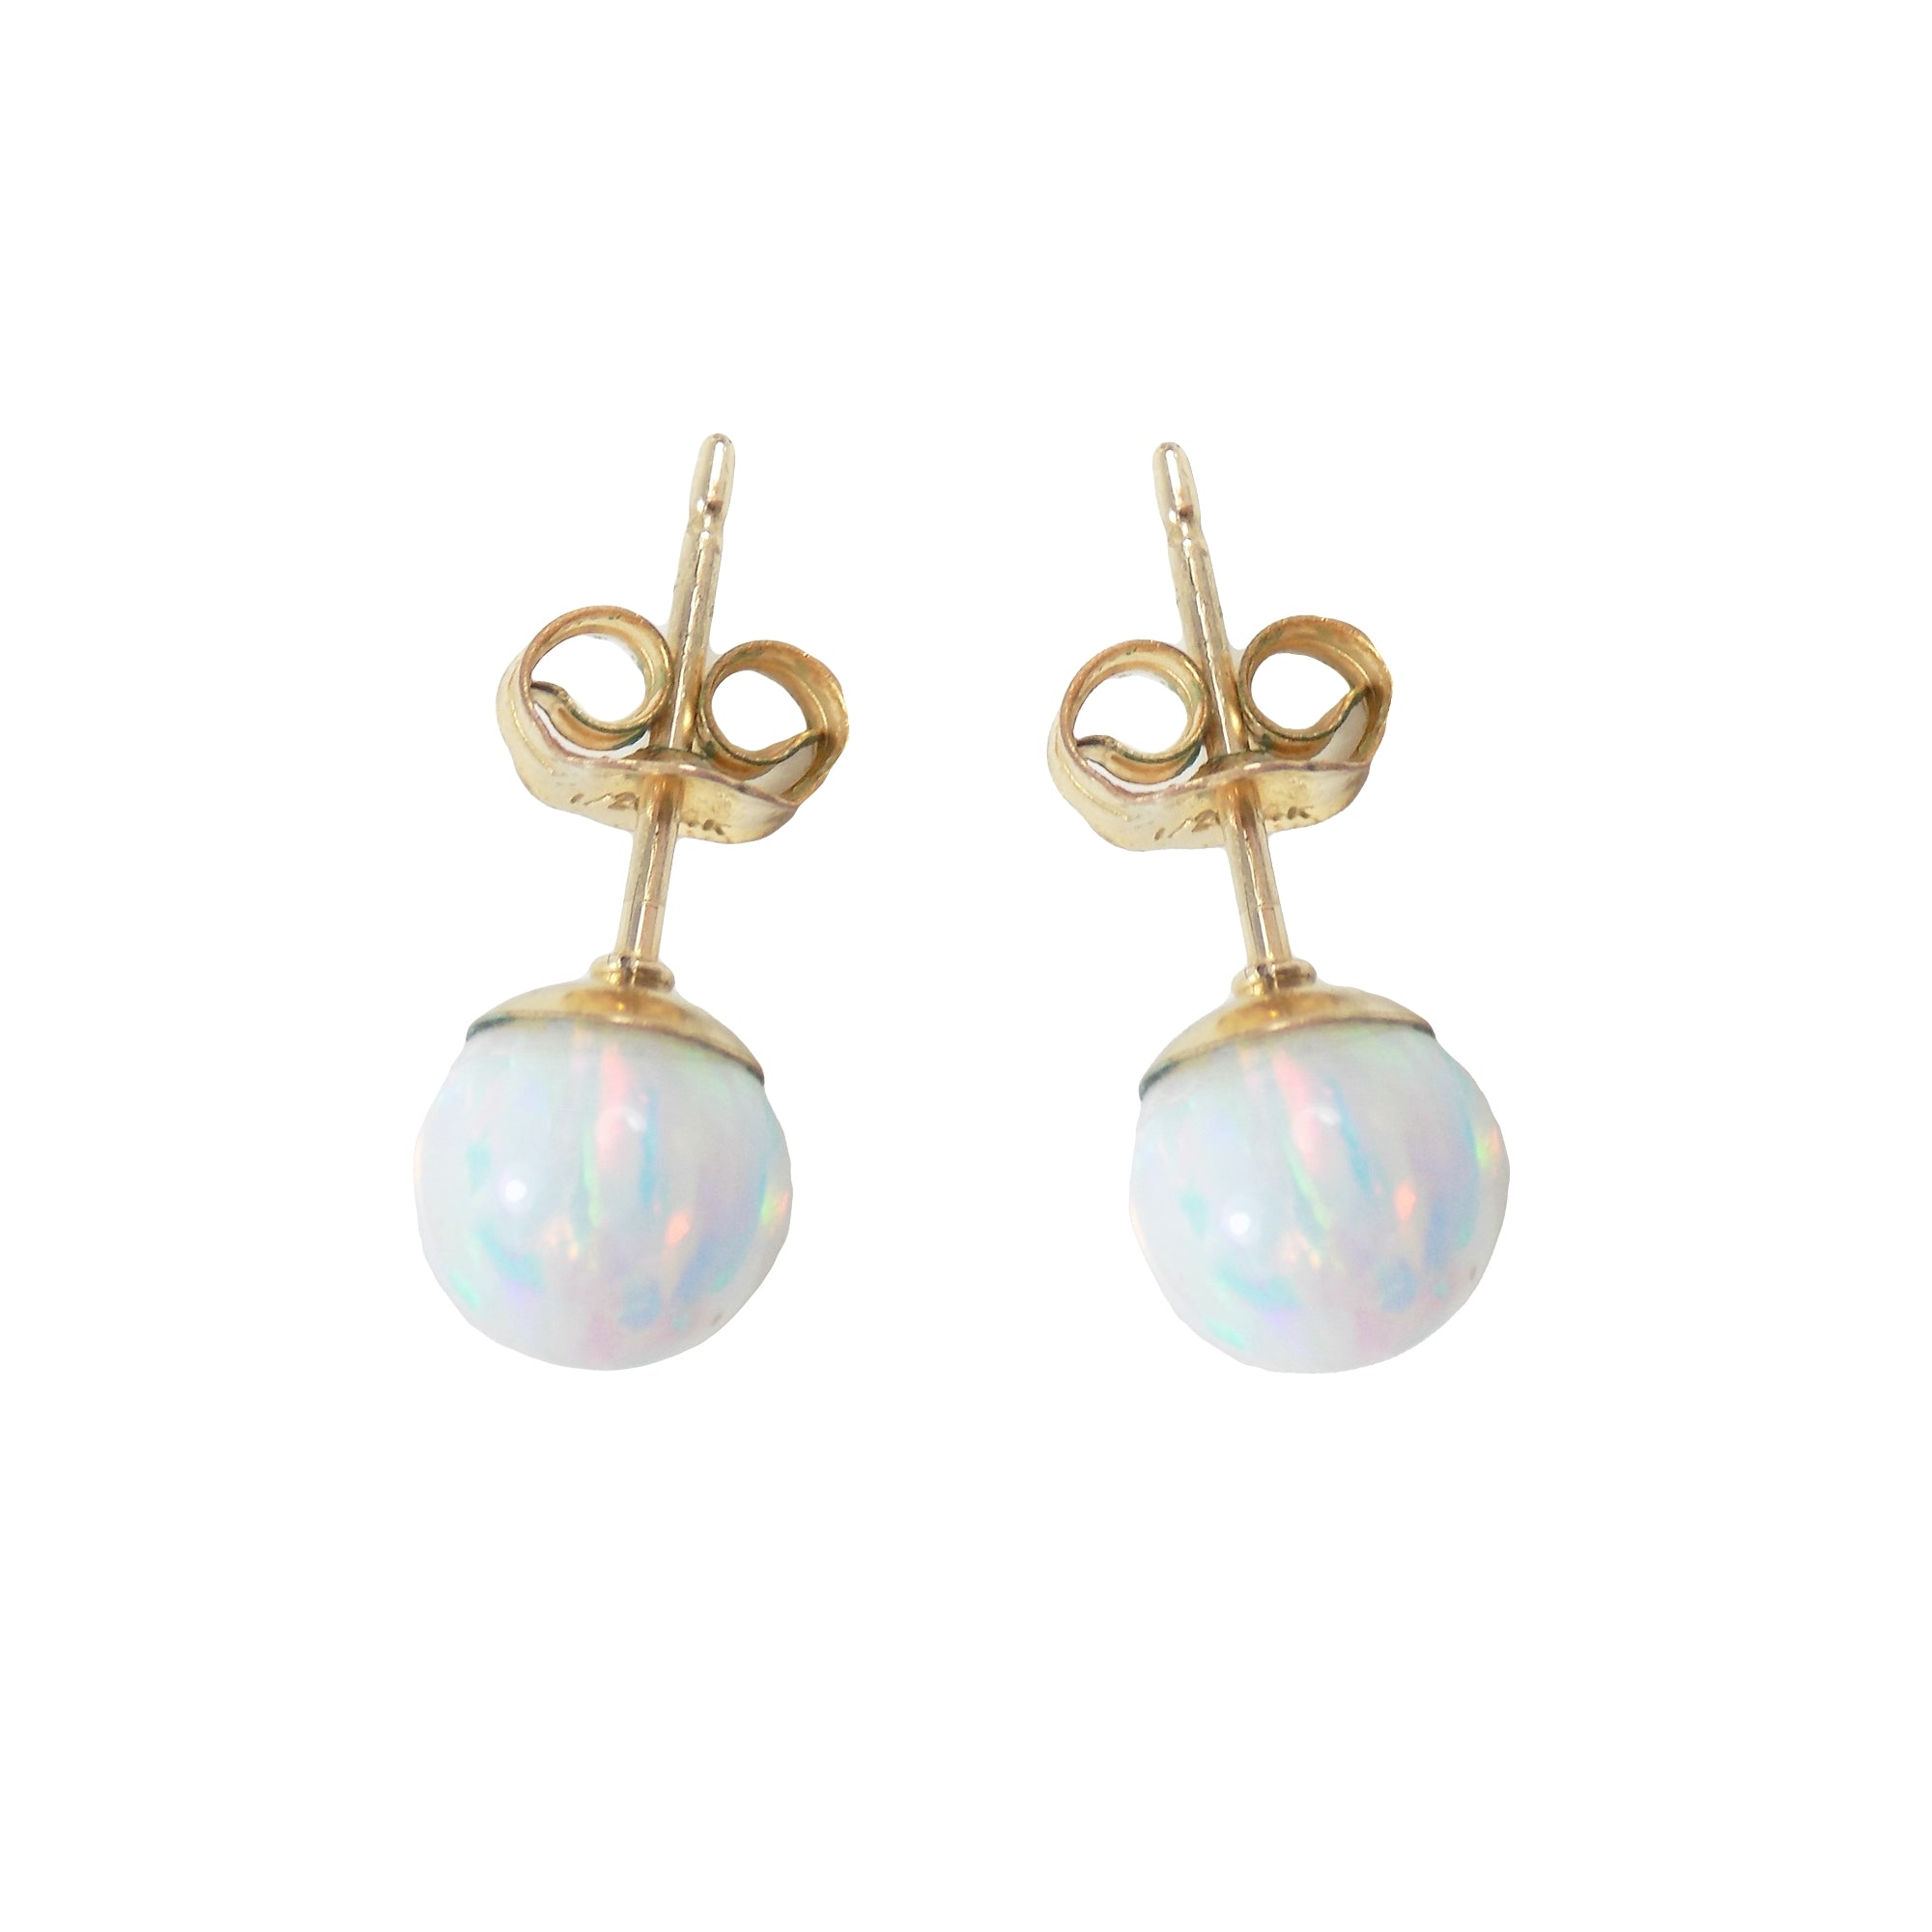 Cup and Earring Back 5.0mm. gold opal stud earrings